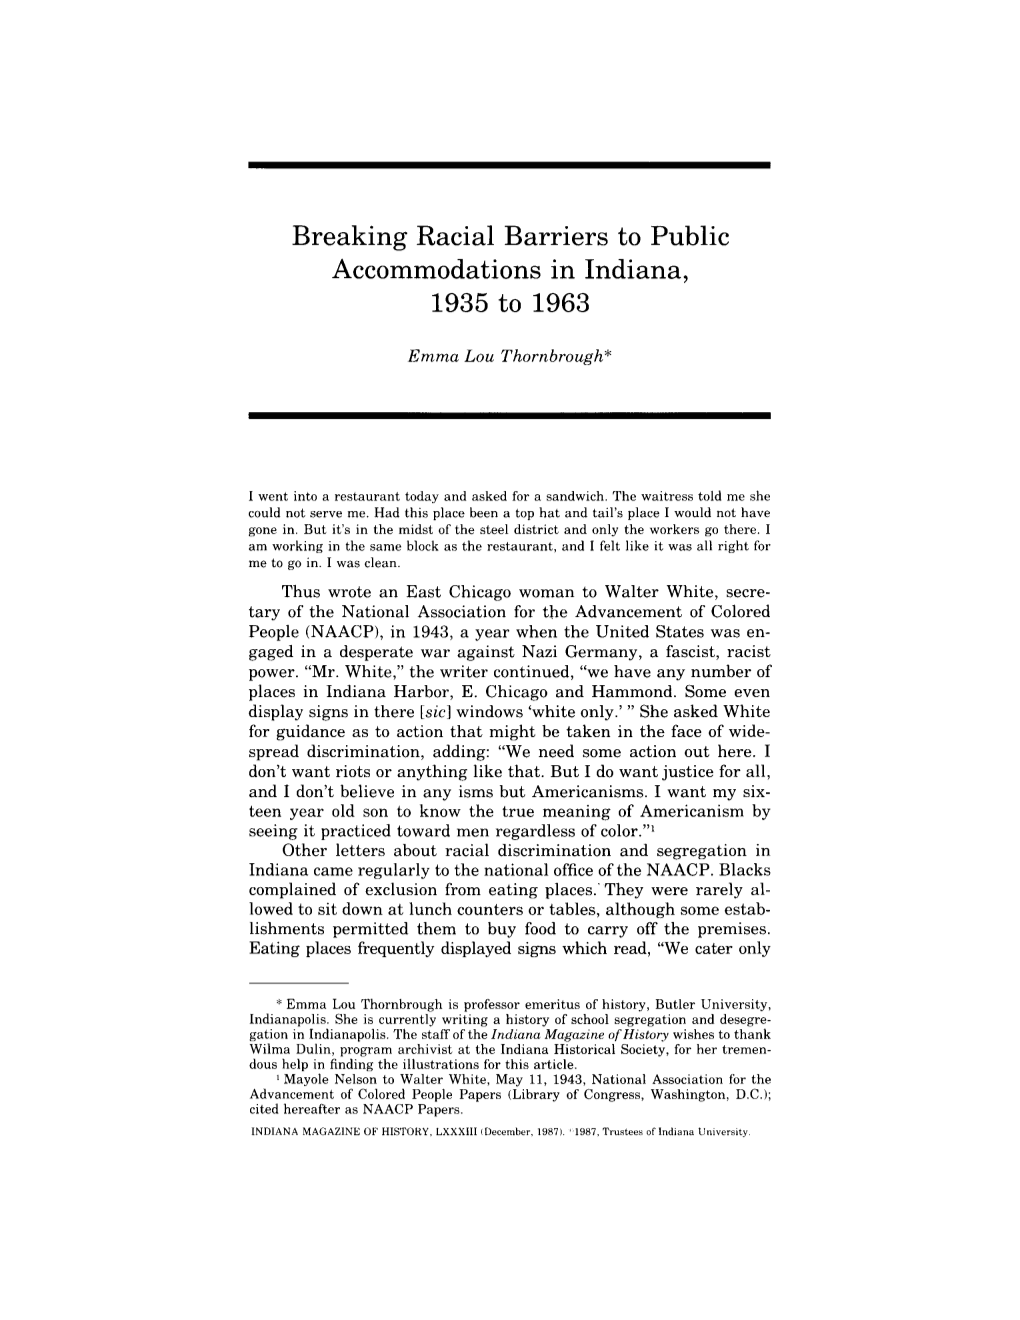 Breaking Racial Barriers to Public Accommodations in Indiana, 1935 to 1963